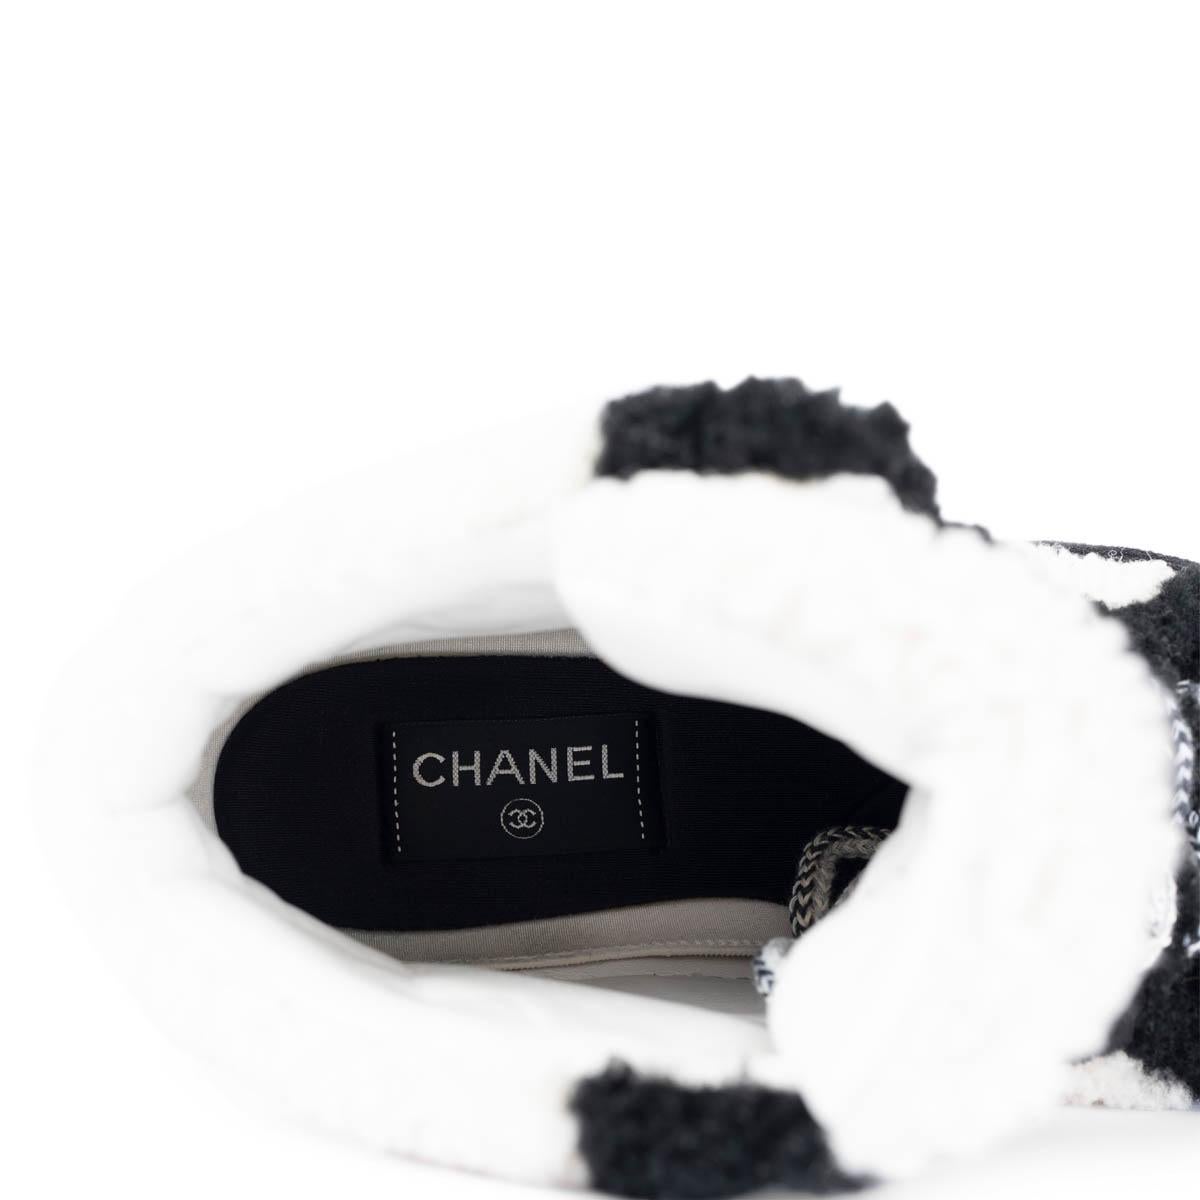 CHANEL black & white 2019 19B SHEARLING Sneakers Shoes 37.5 For Sale 1